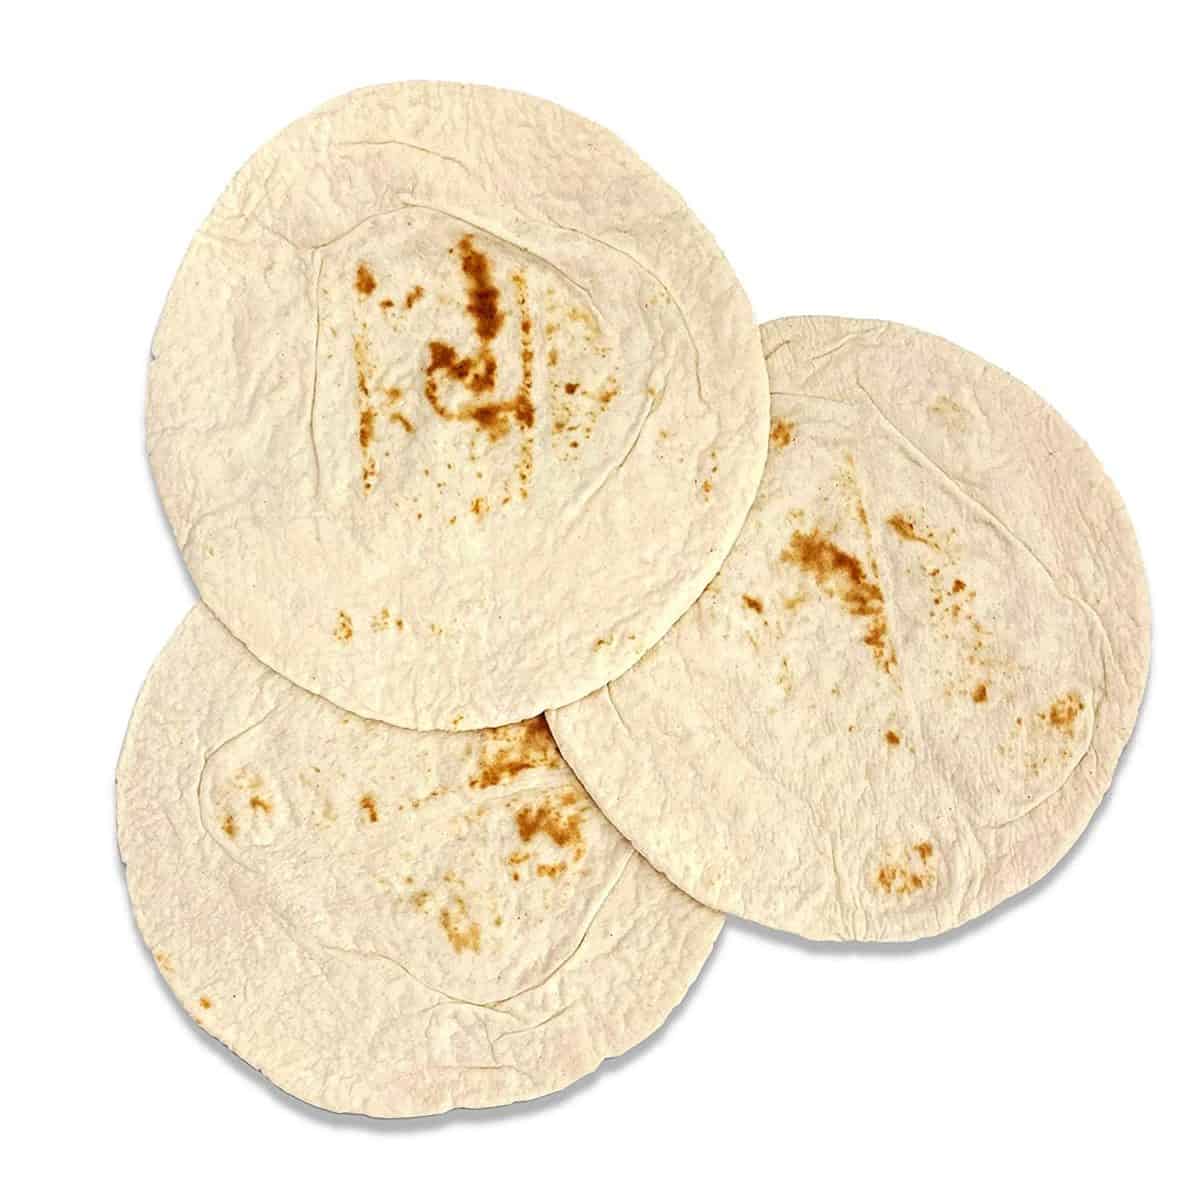 Tortillas as a substitute for egg roll wrapper